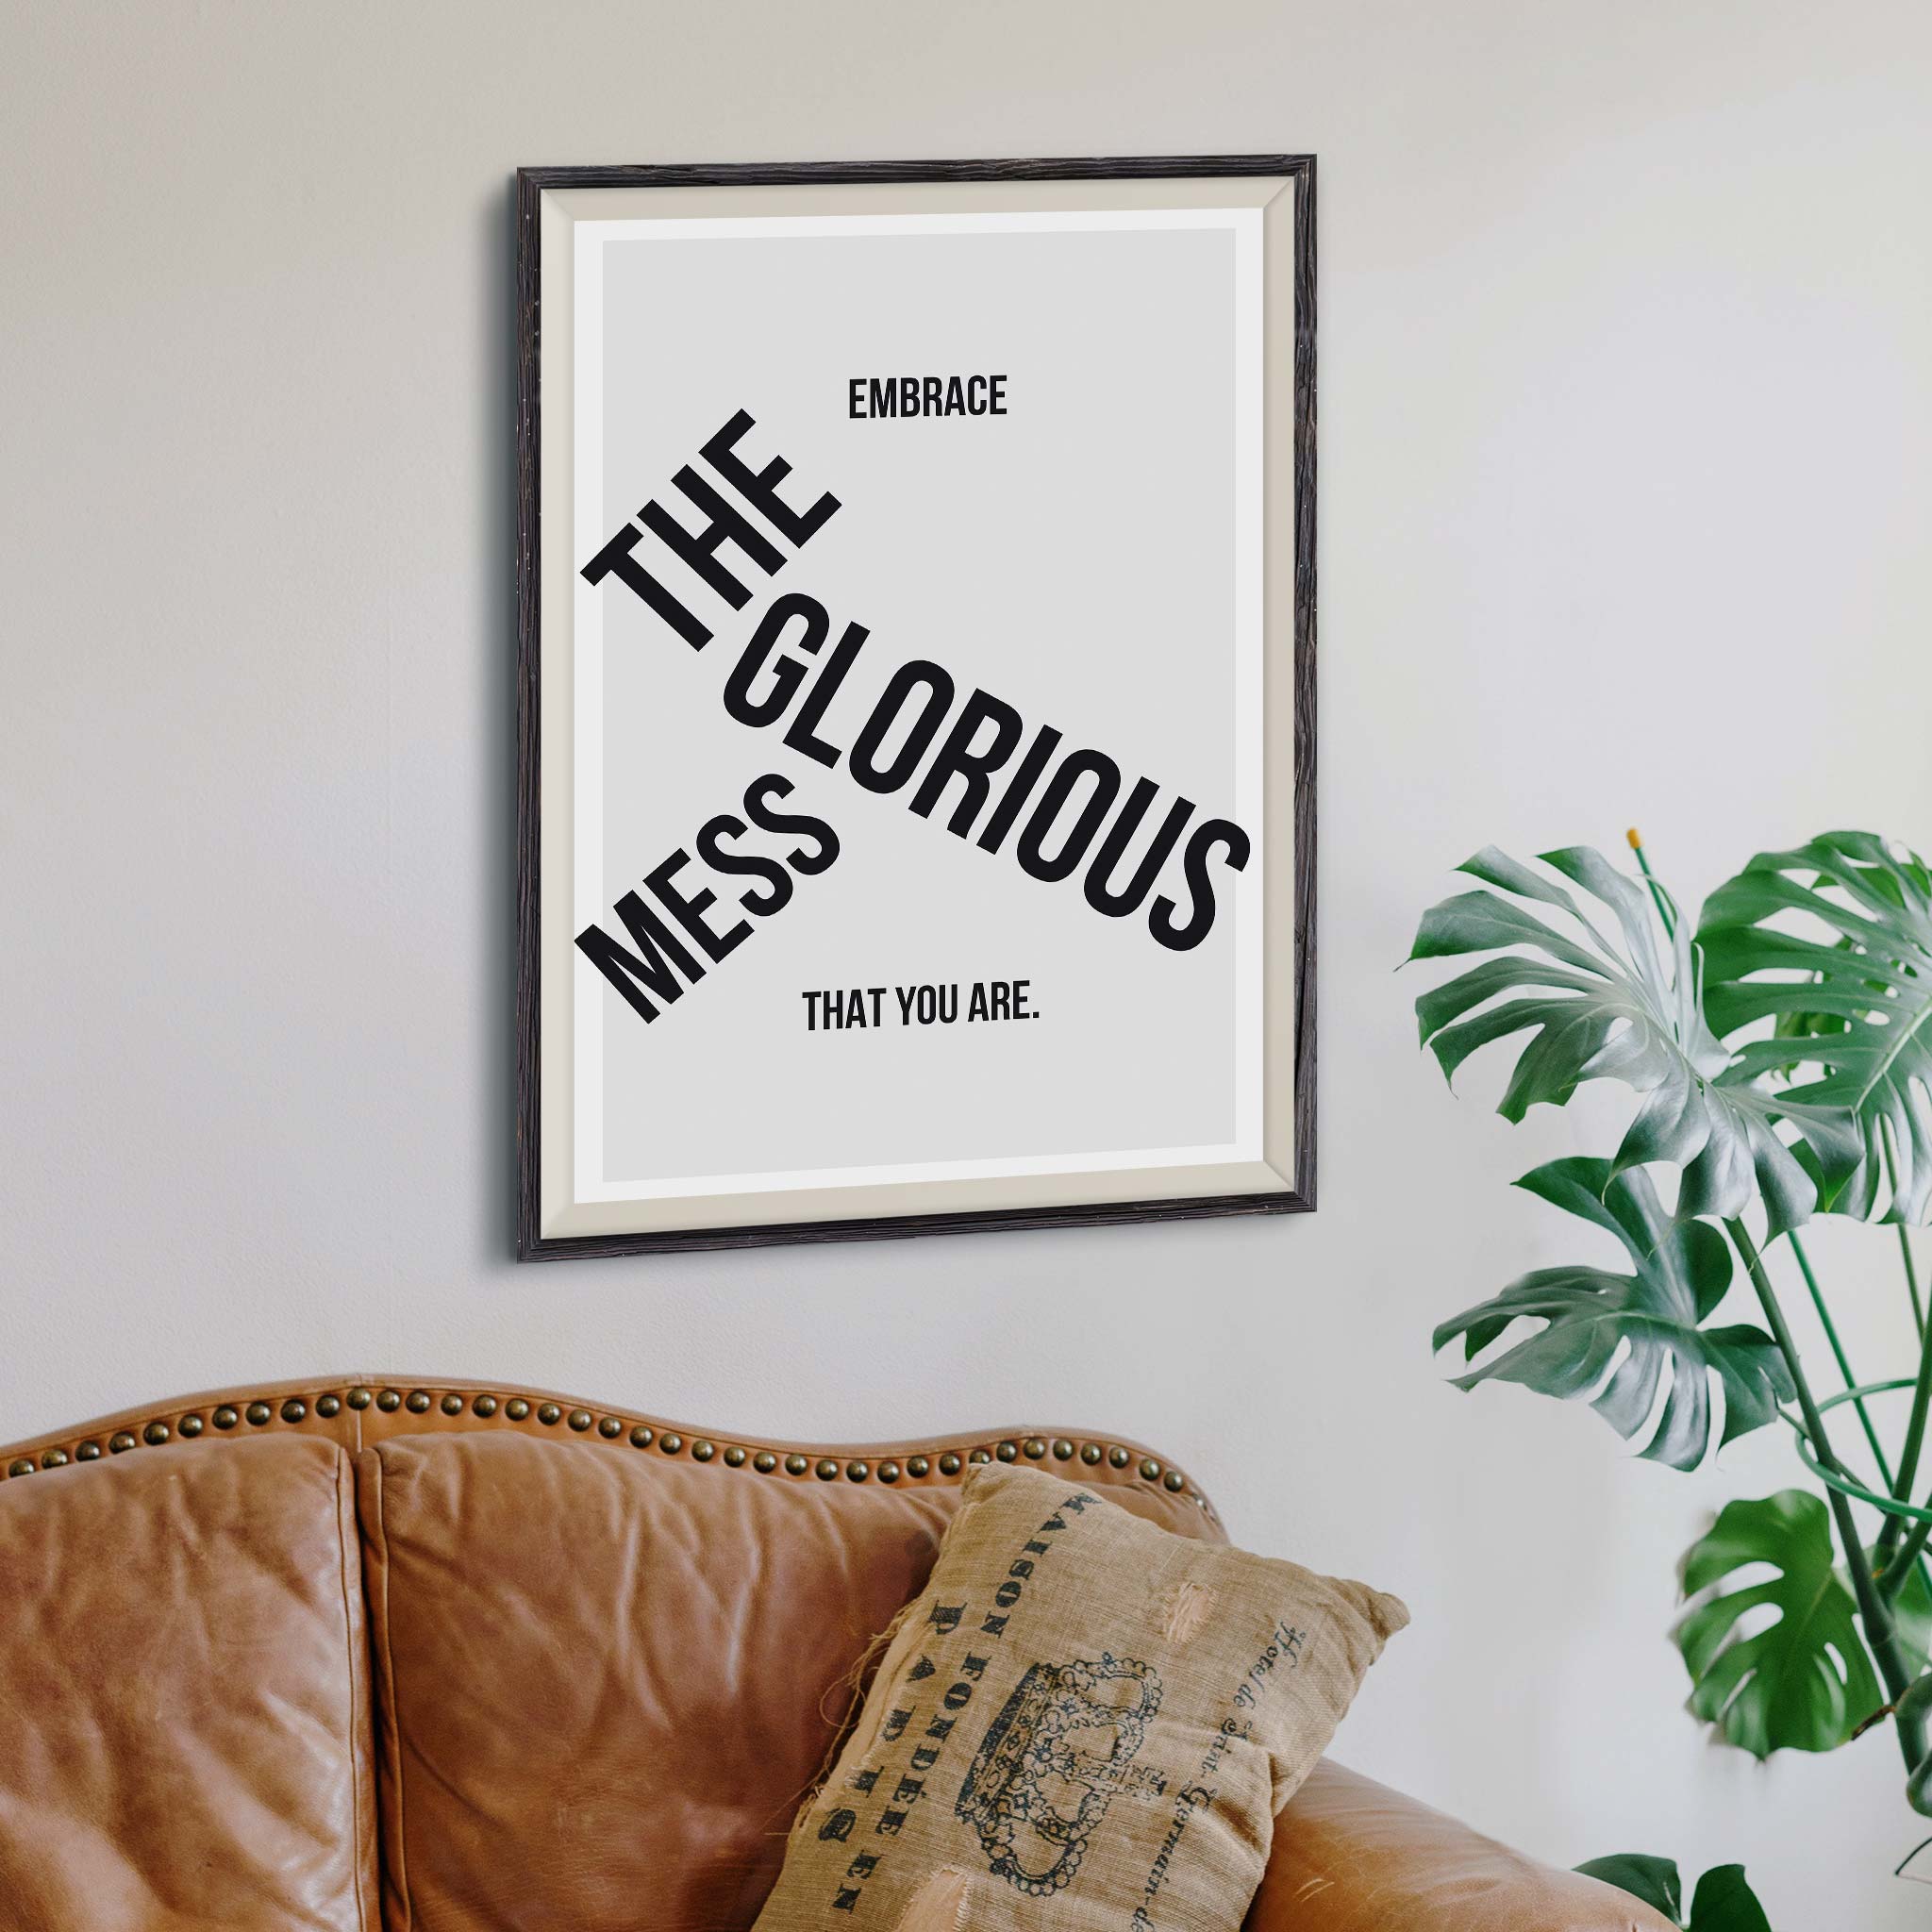 Embrace the glorious mess that you are